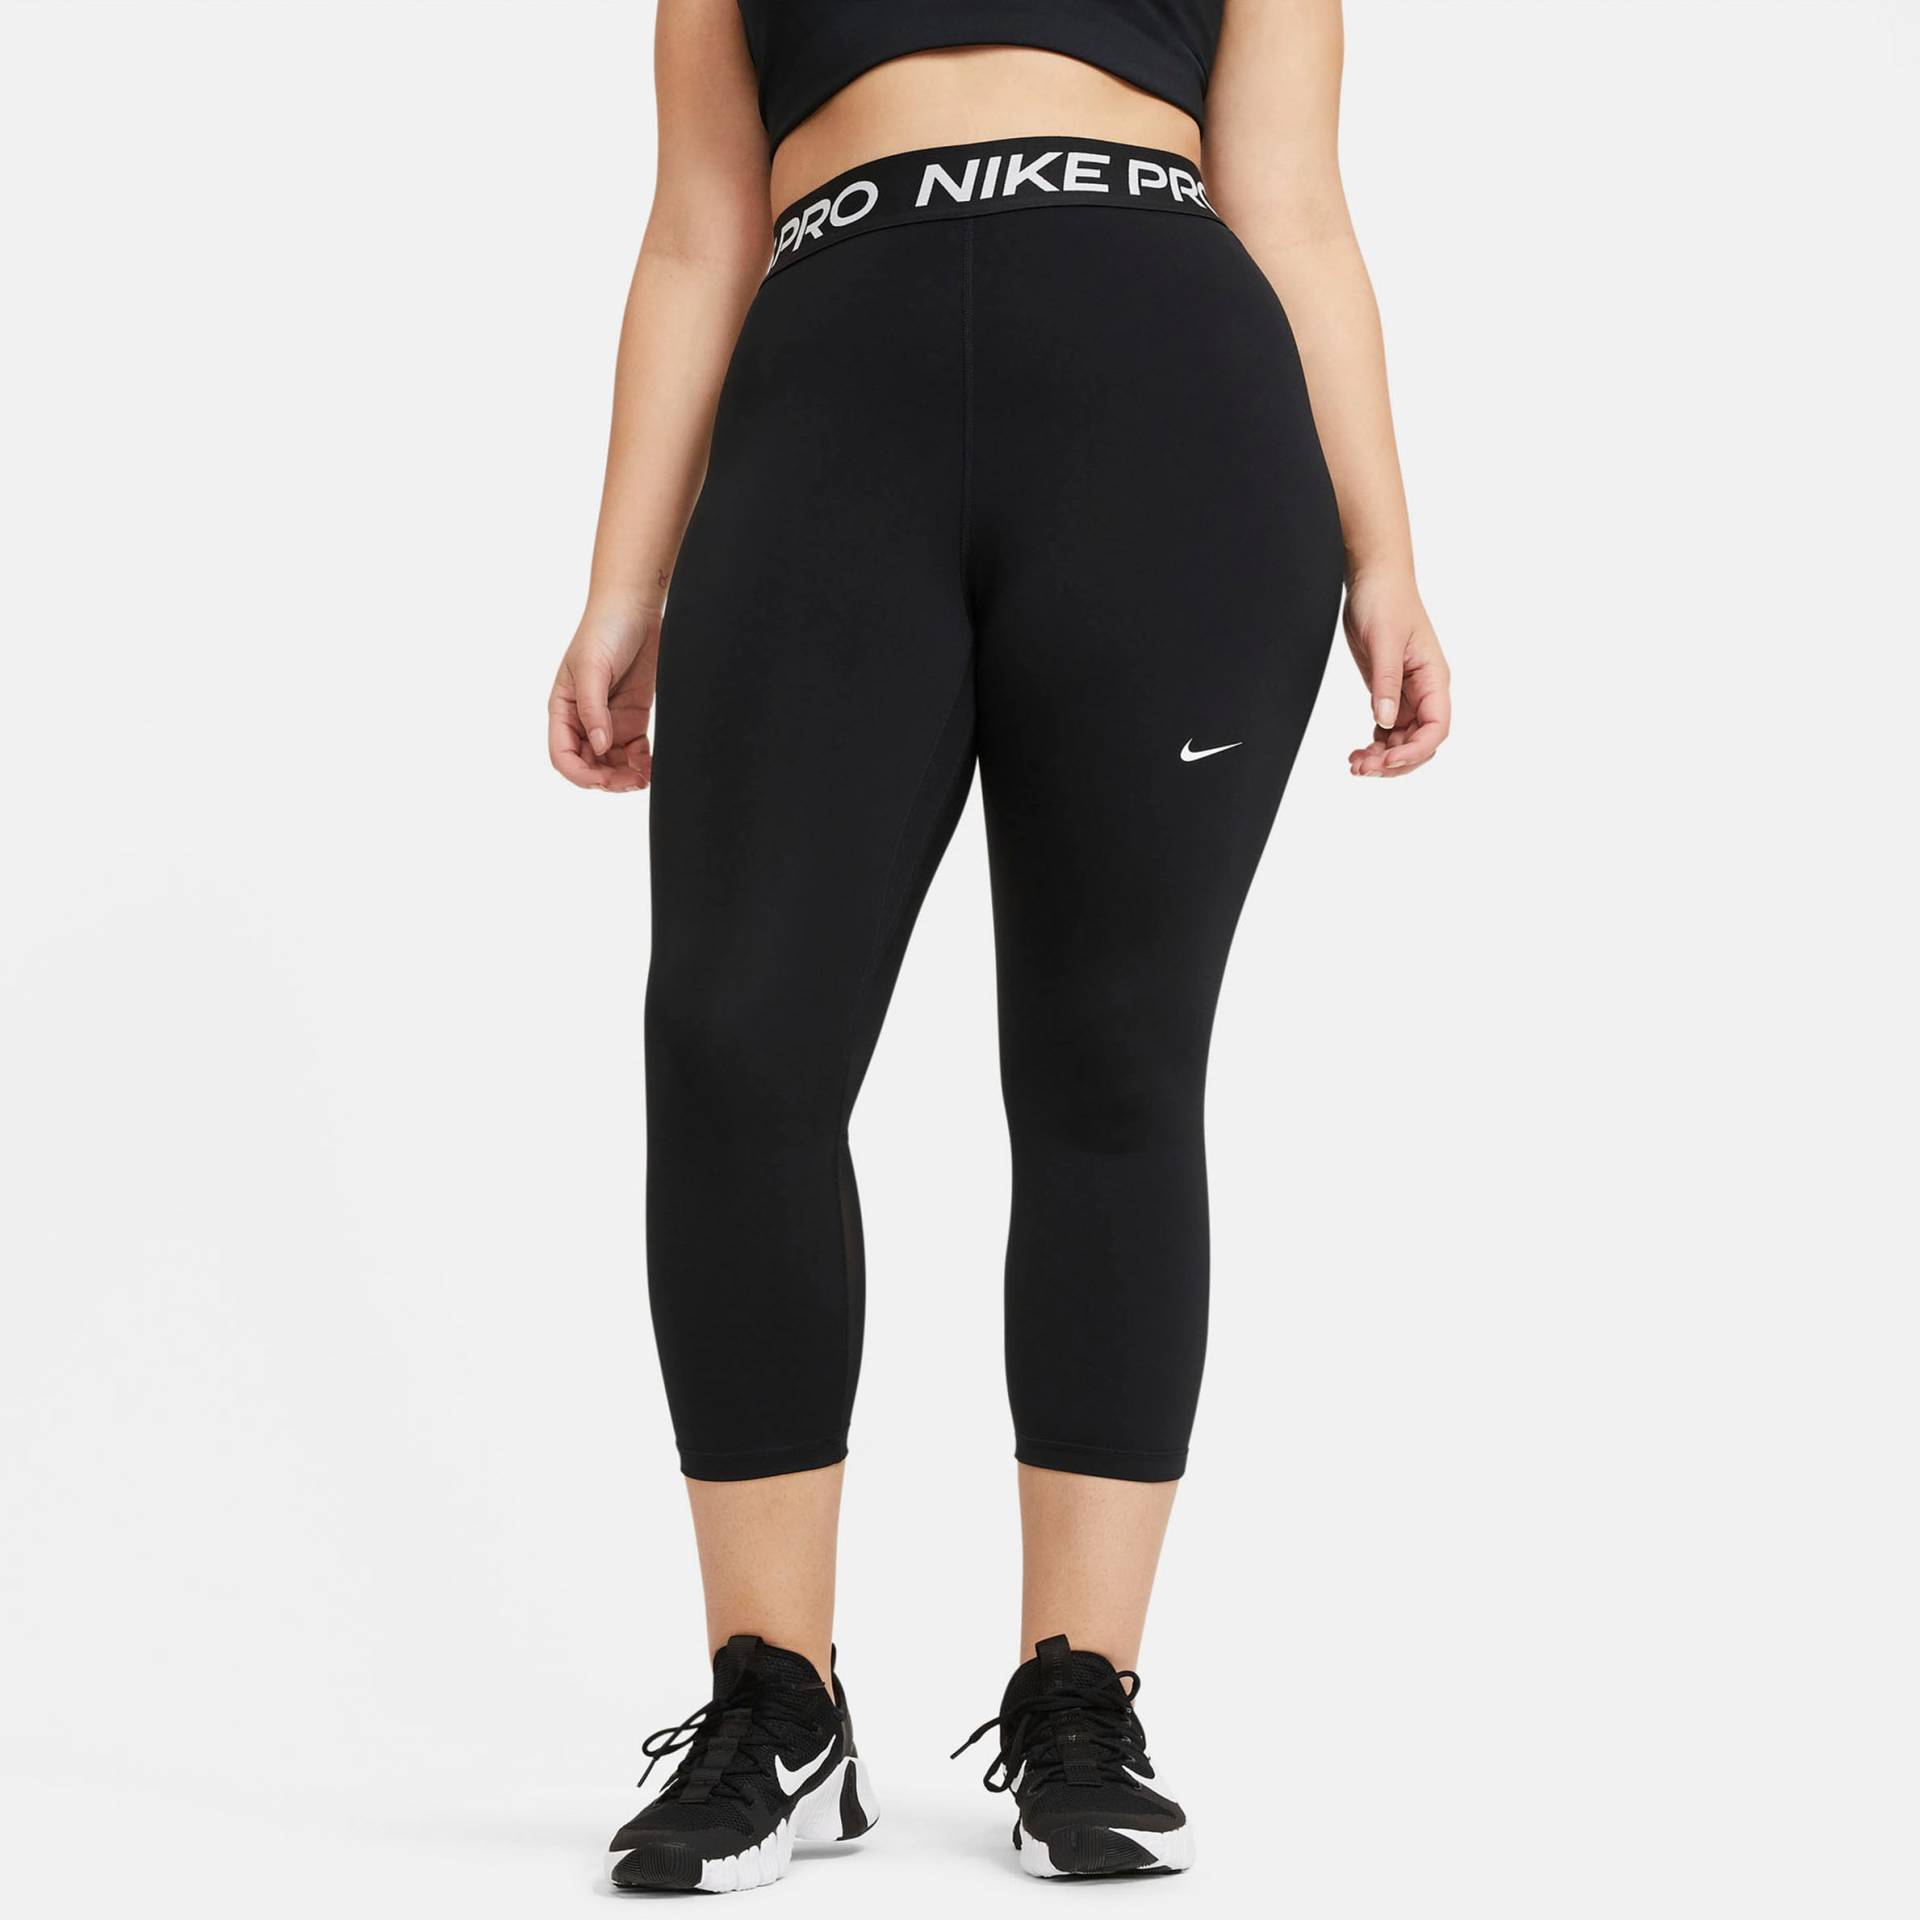 Nike Funktionstights »Nike Pro 365 Women's Cropped Tights Plus Size« von Nike